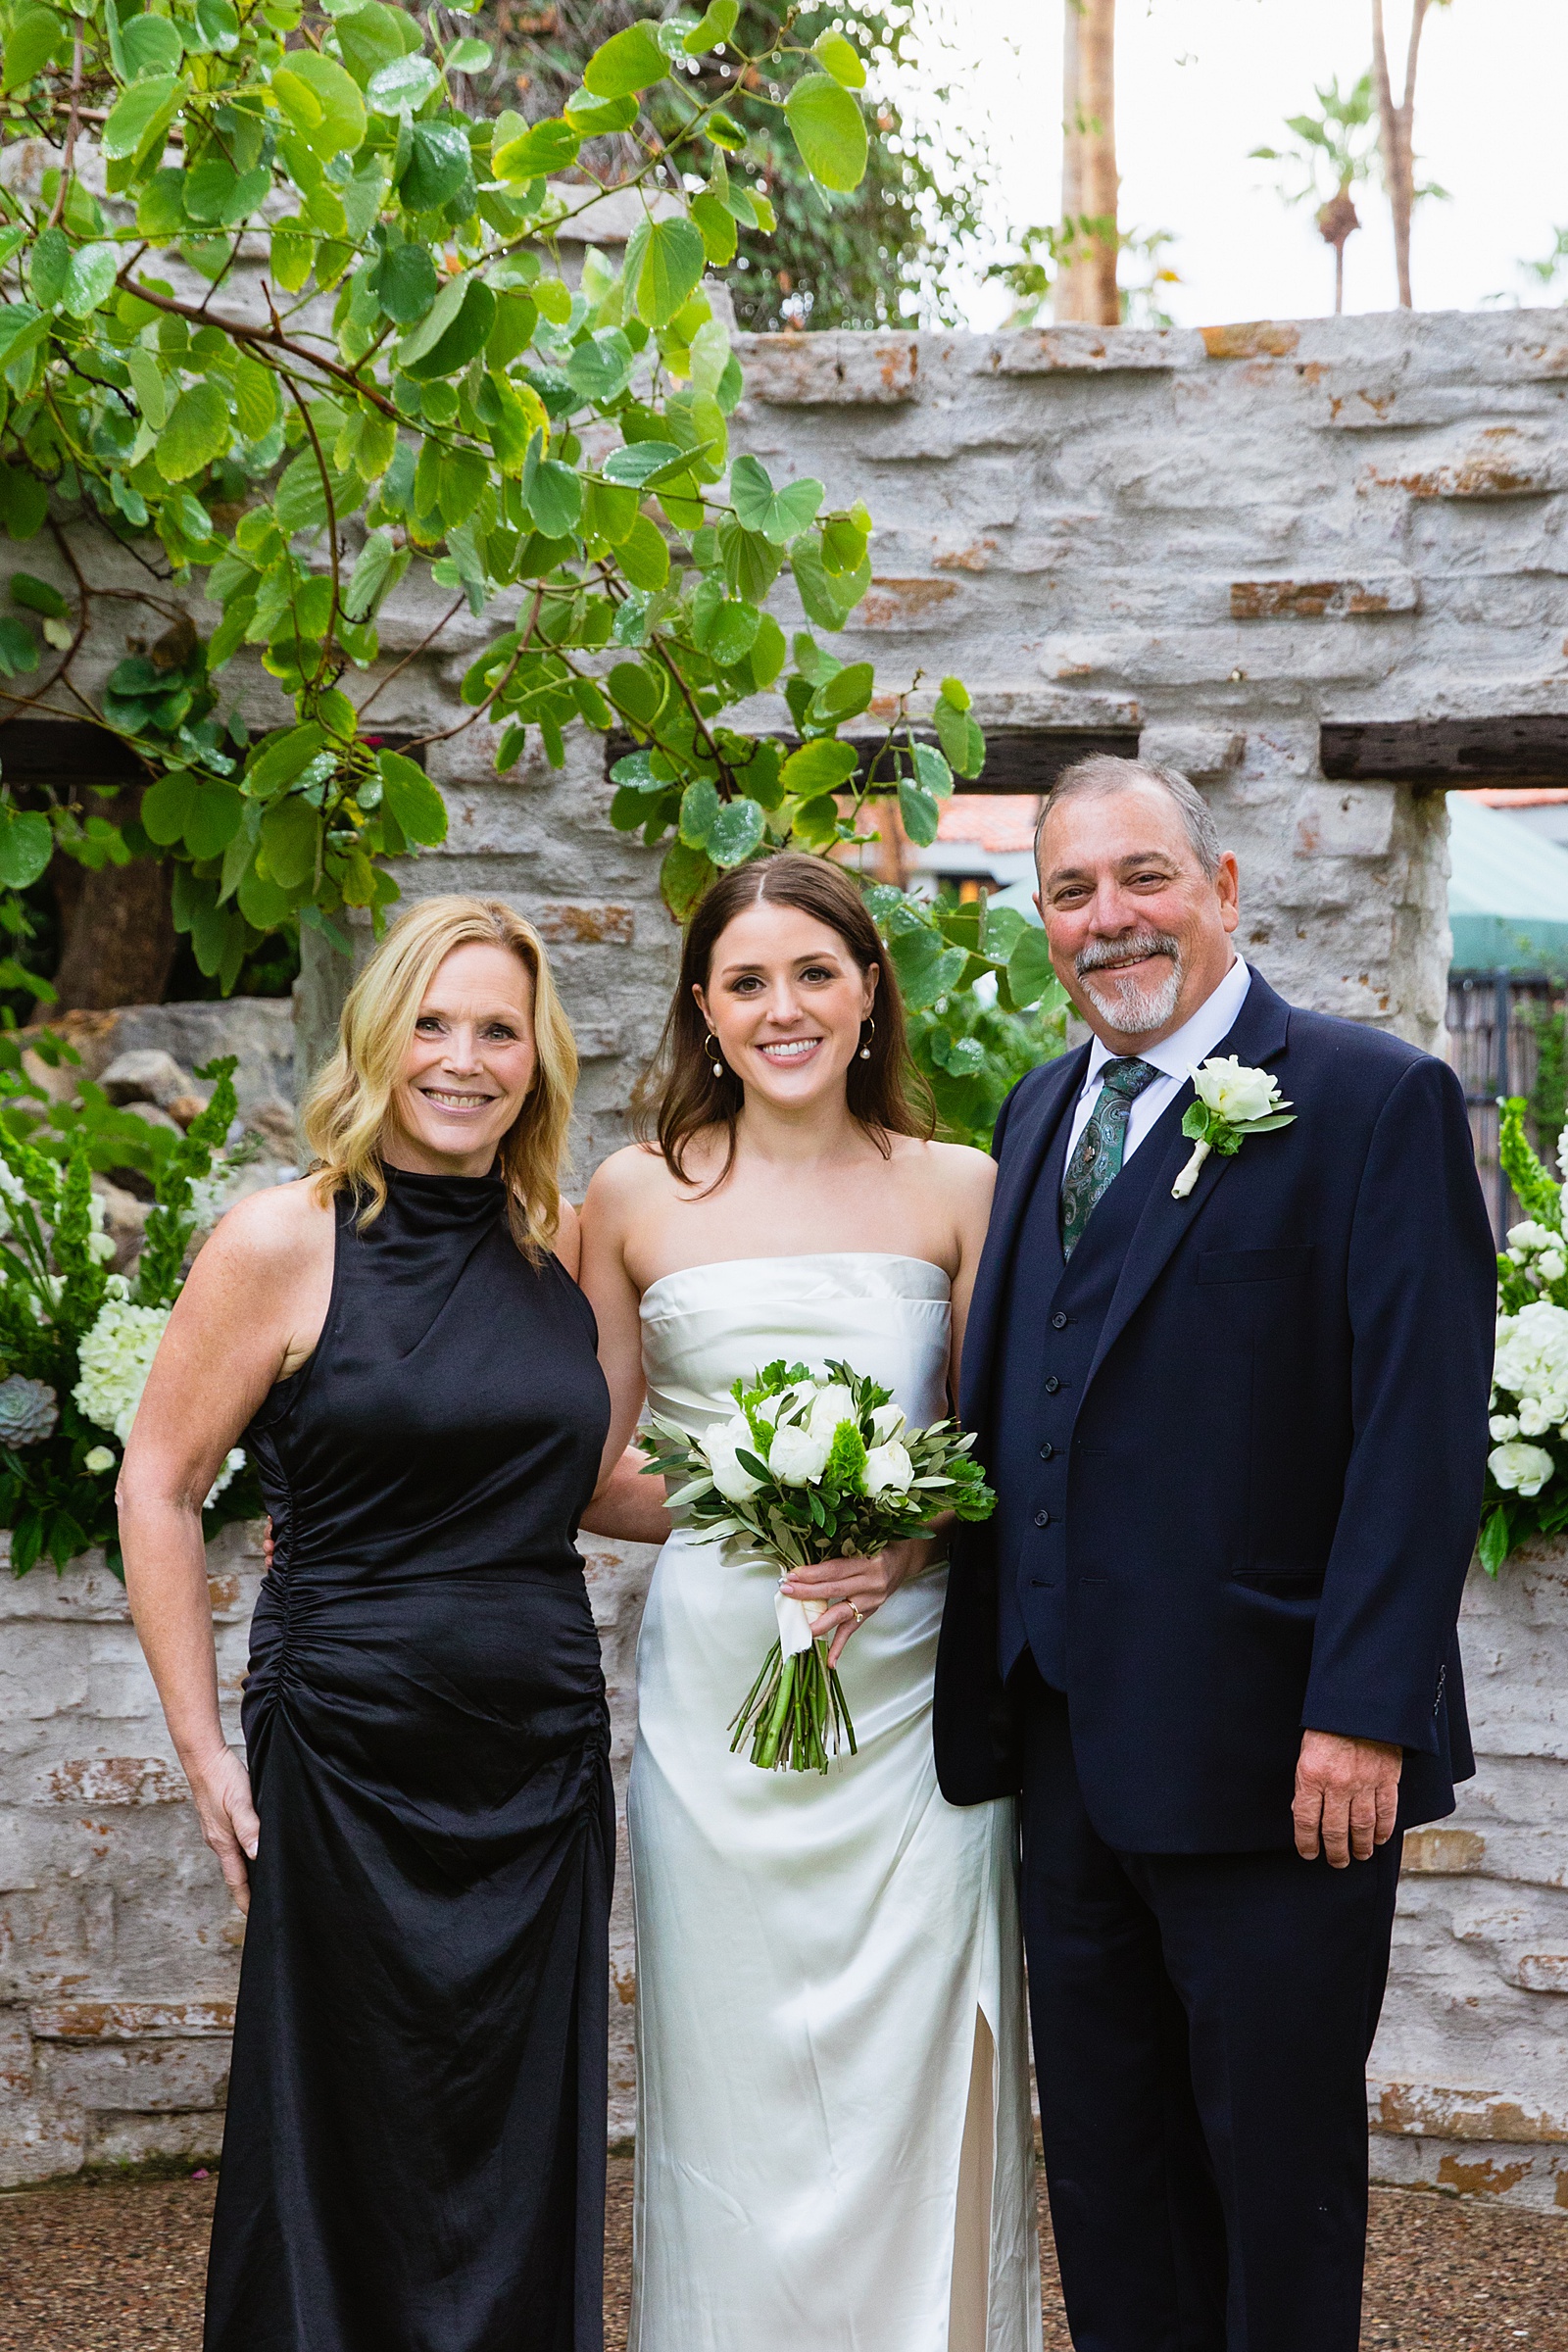 Bride and her parents together at a The Scott wedding by Arizona wedding photographer PMA Photography.